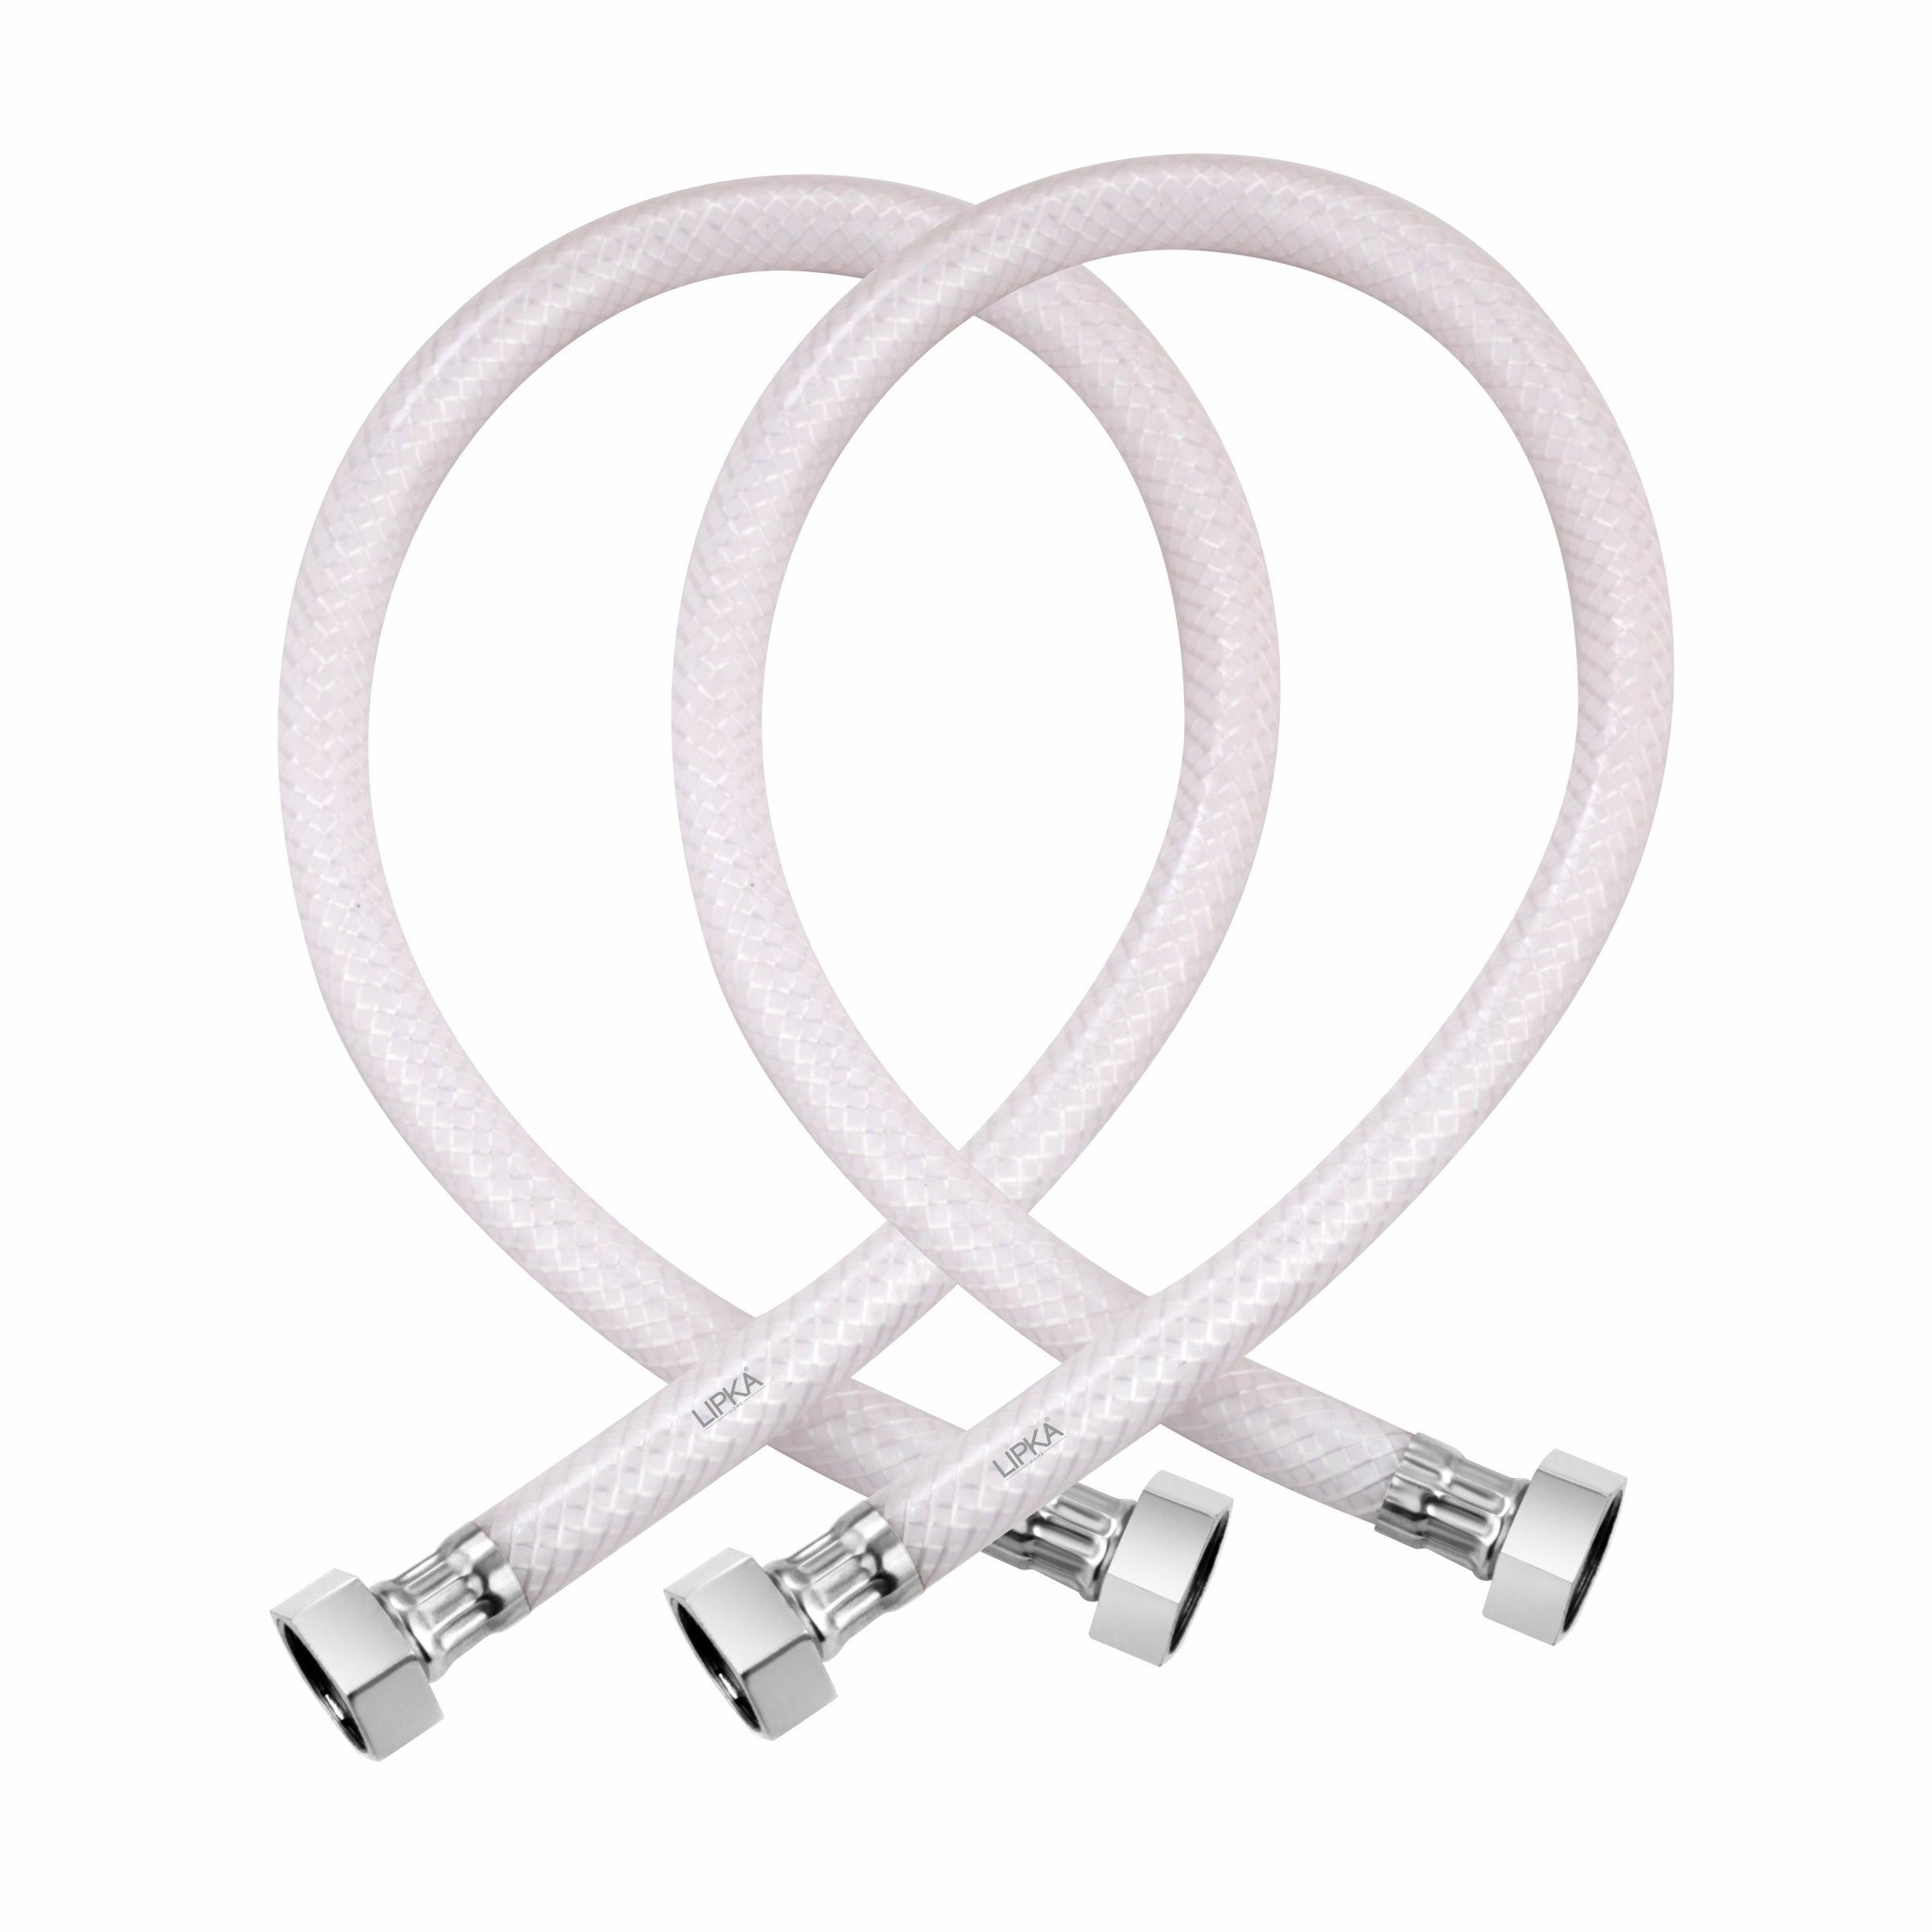 Connection Pipe PVC (24 Inches) (Pack of 2)